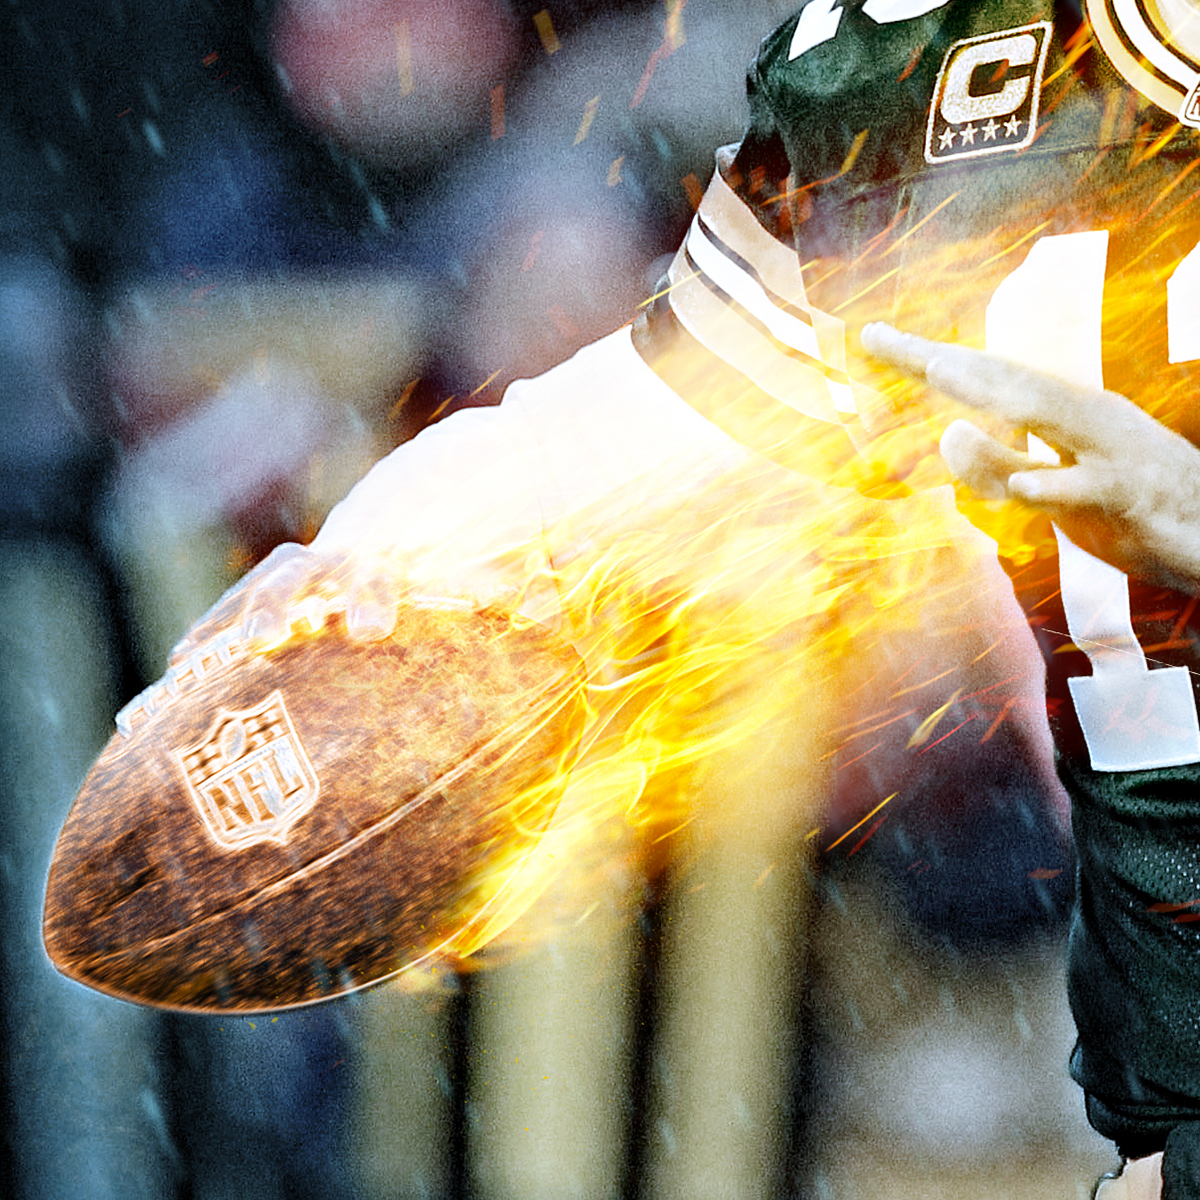 packers nfl Photo Retouching Edits fire Flames GreenBay Aaron Rodgers Quaterback ice Before and After instagram wallpaper Playoffs